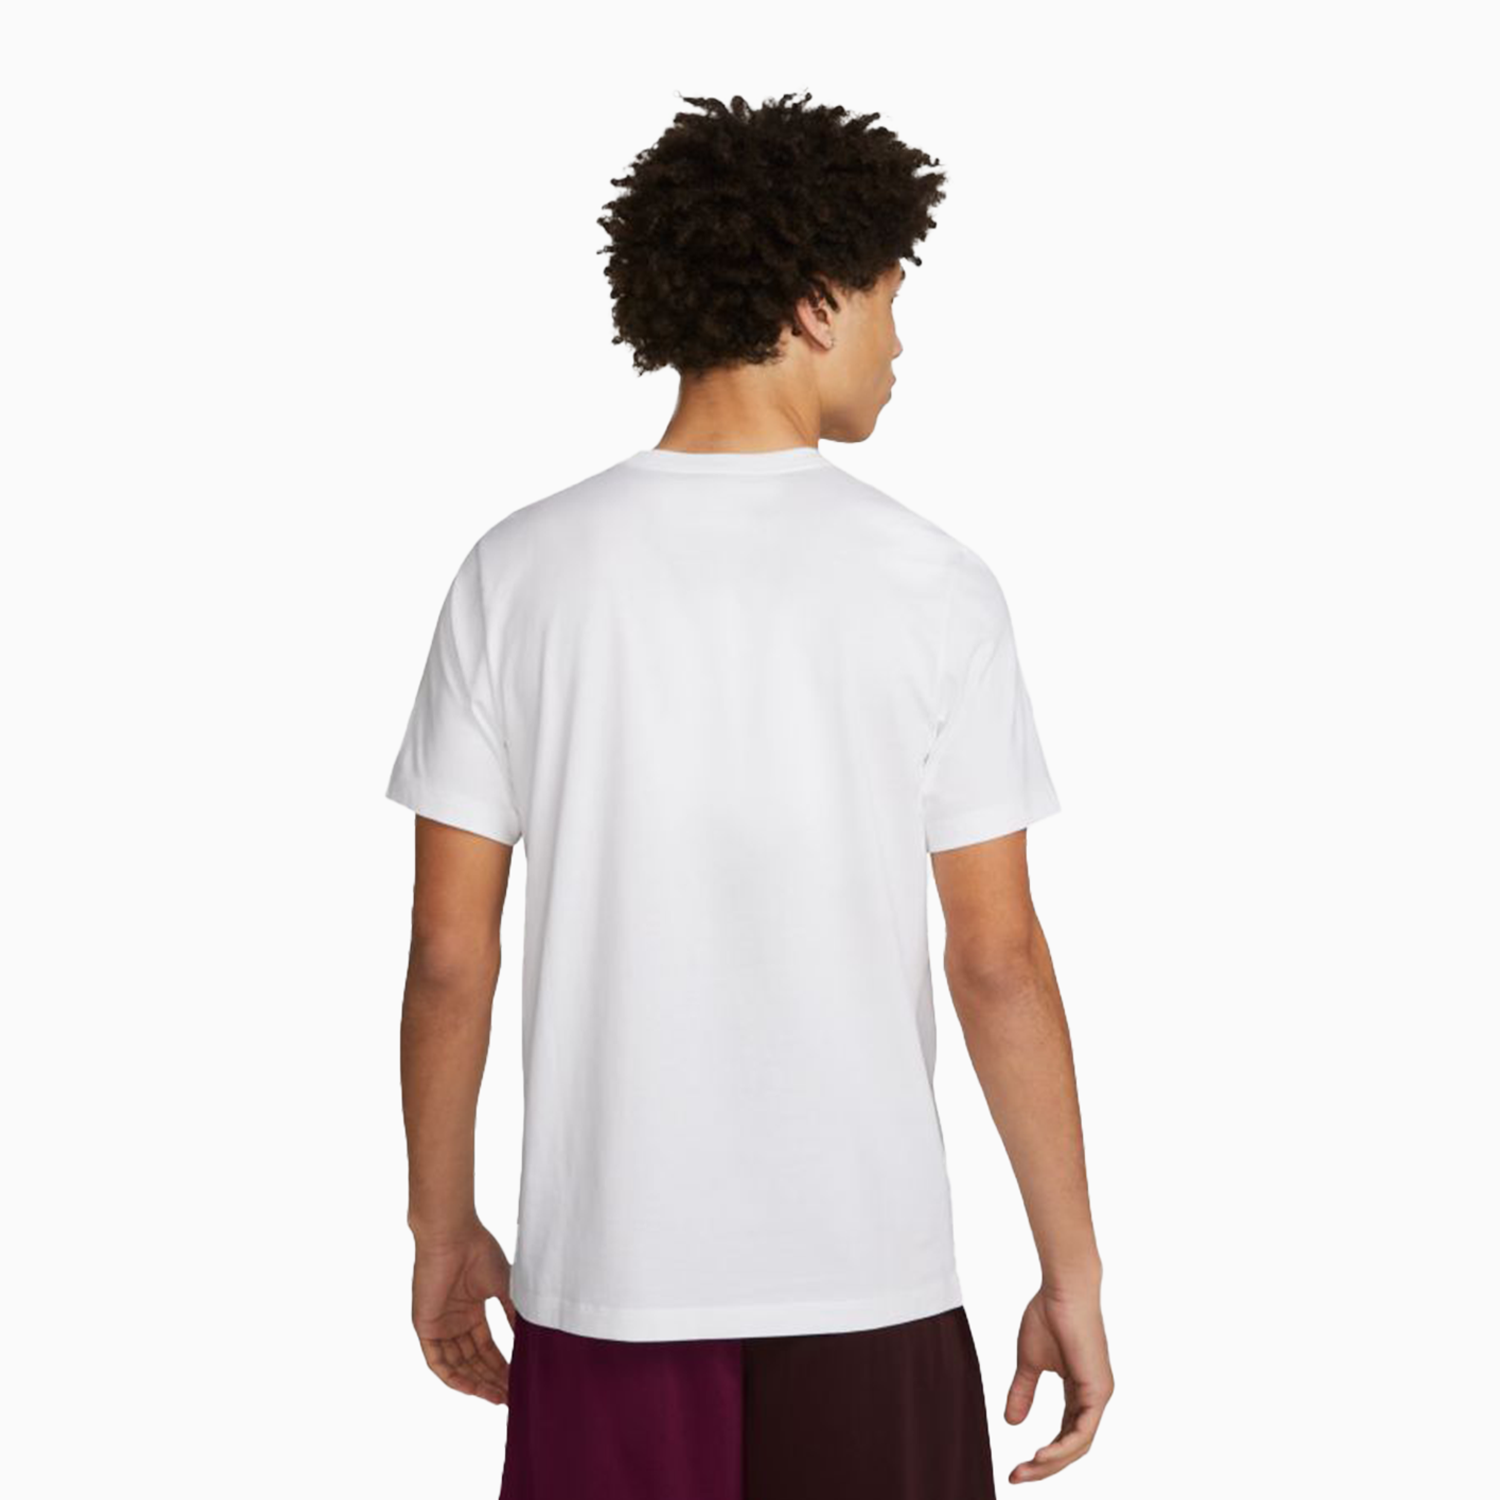 Men's Nike Sportswear T Shirt - Color: White - Tops and Bottoms USA -